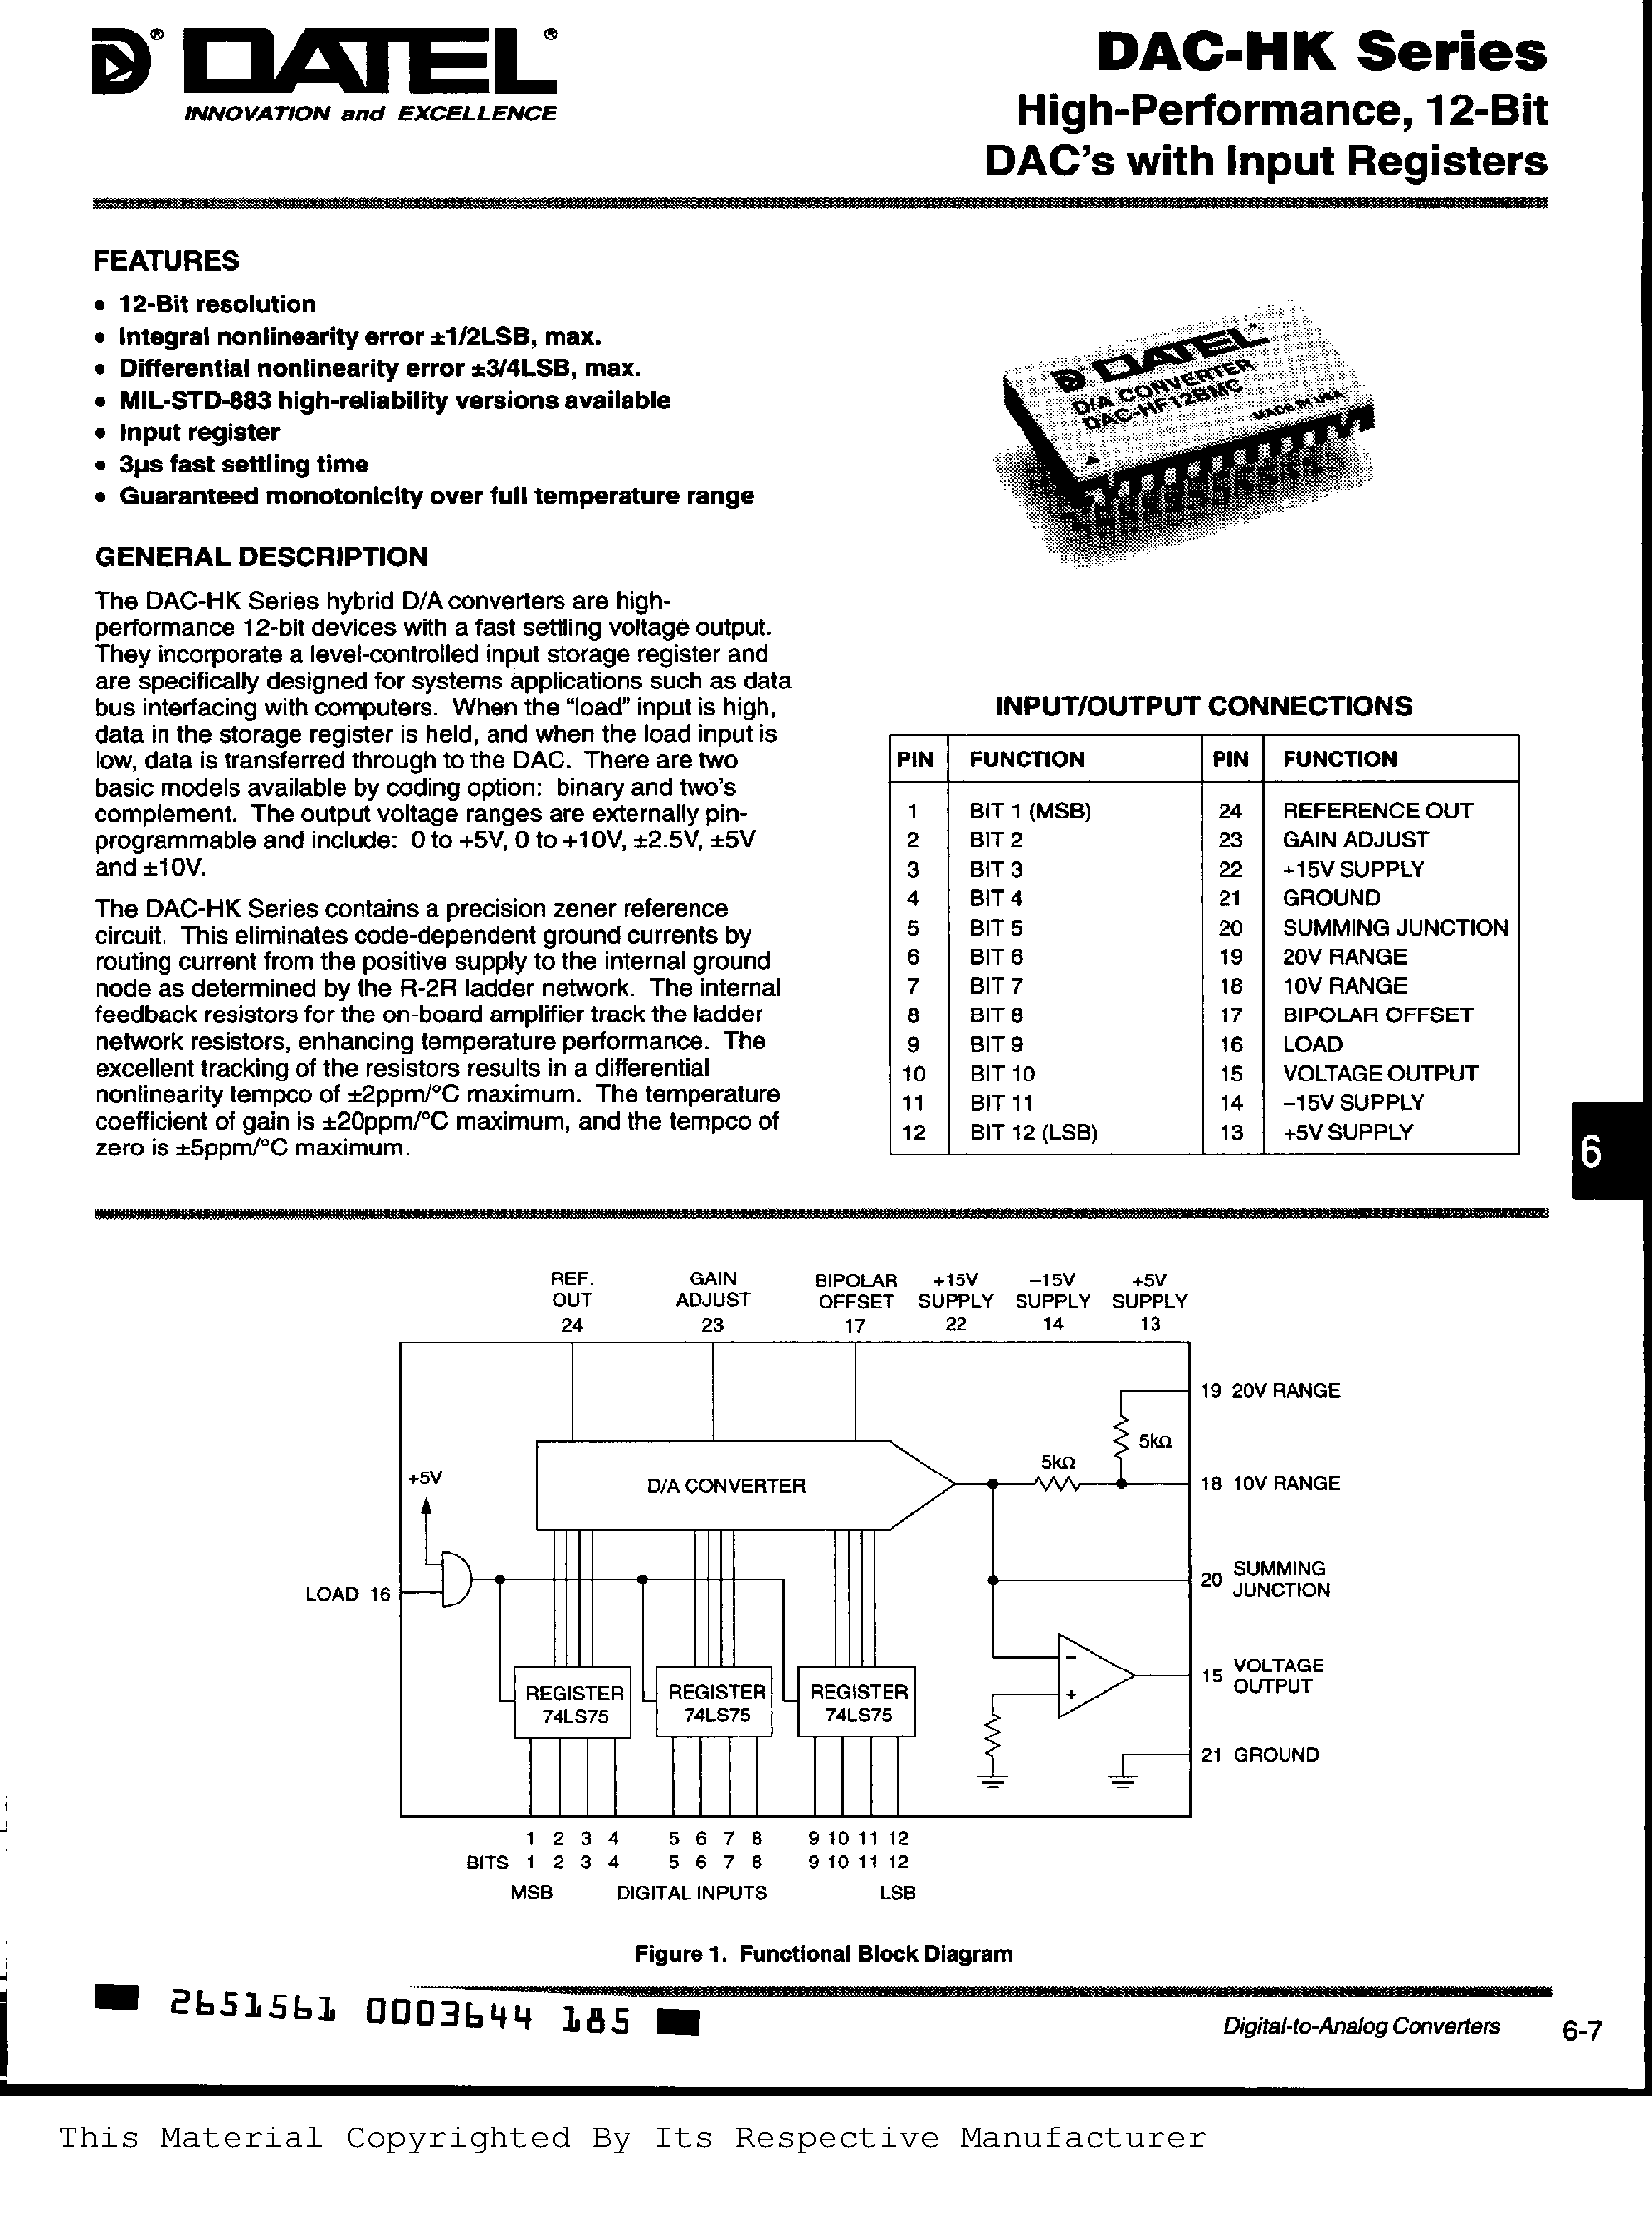 Datasheet DAC-833 - HIGH PERFORMANCE 12 BIT DAC WITH INPUT REGISTERS page 1